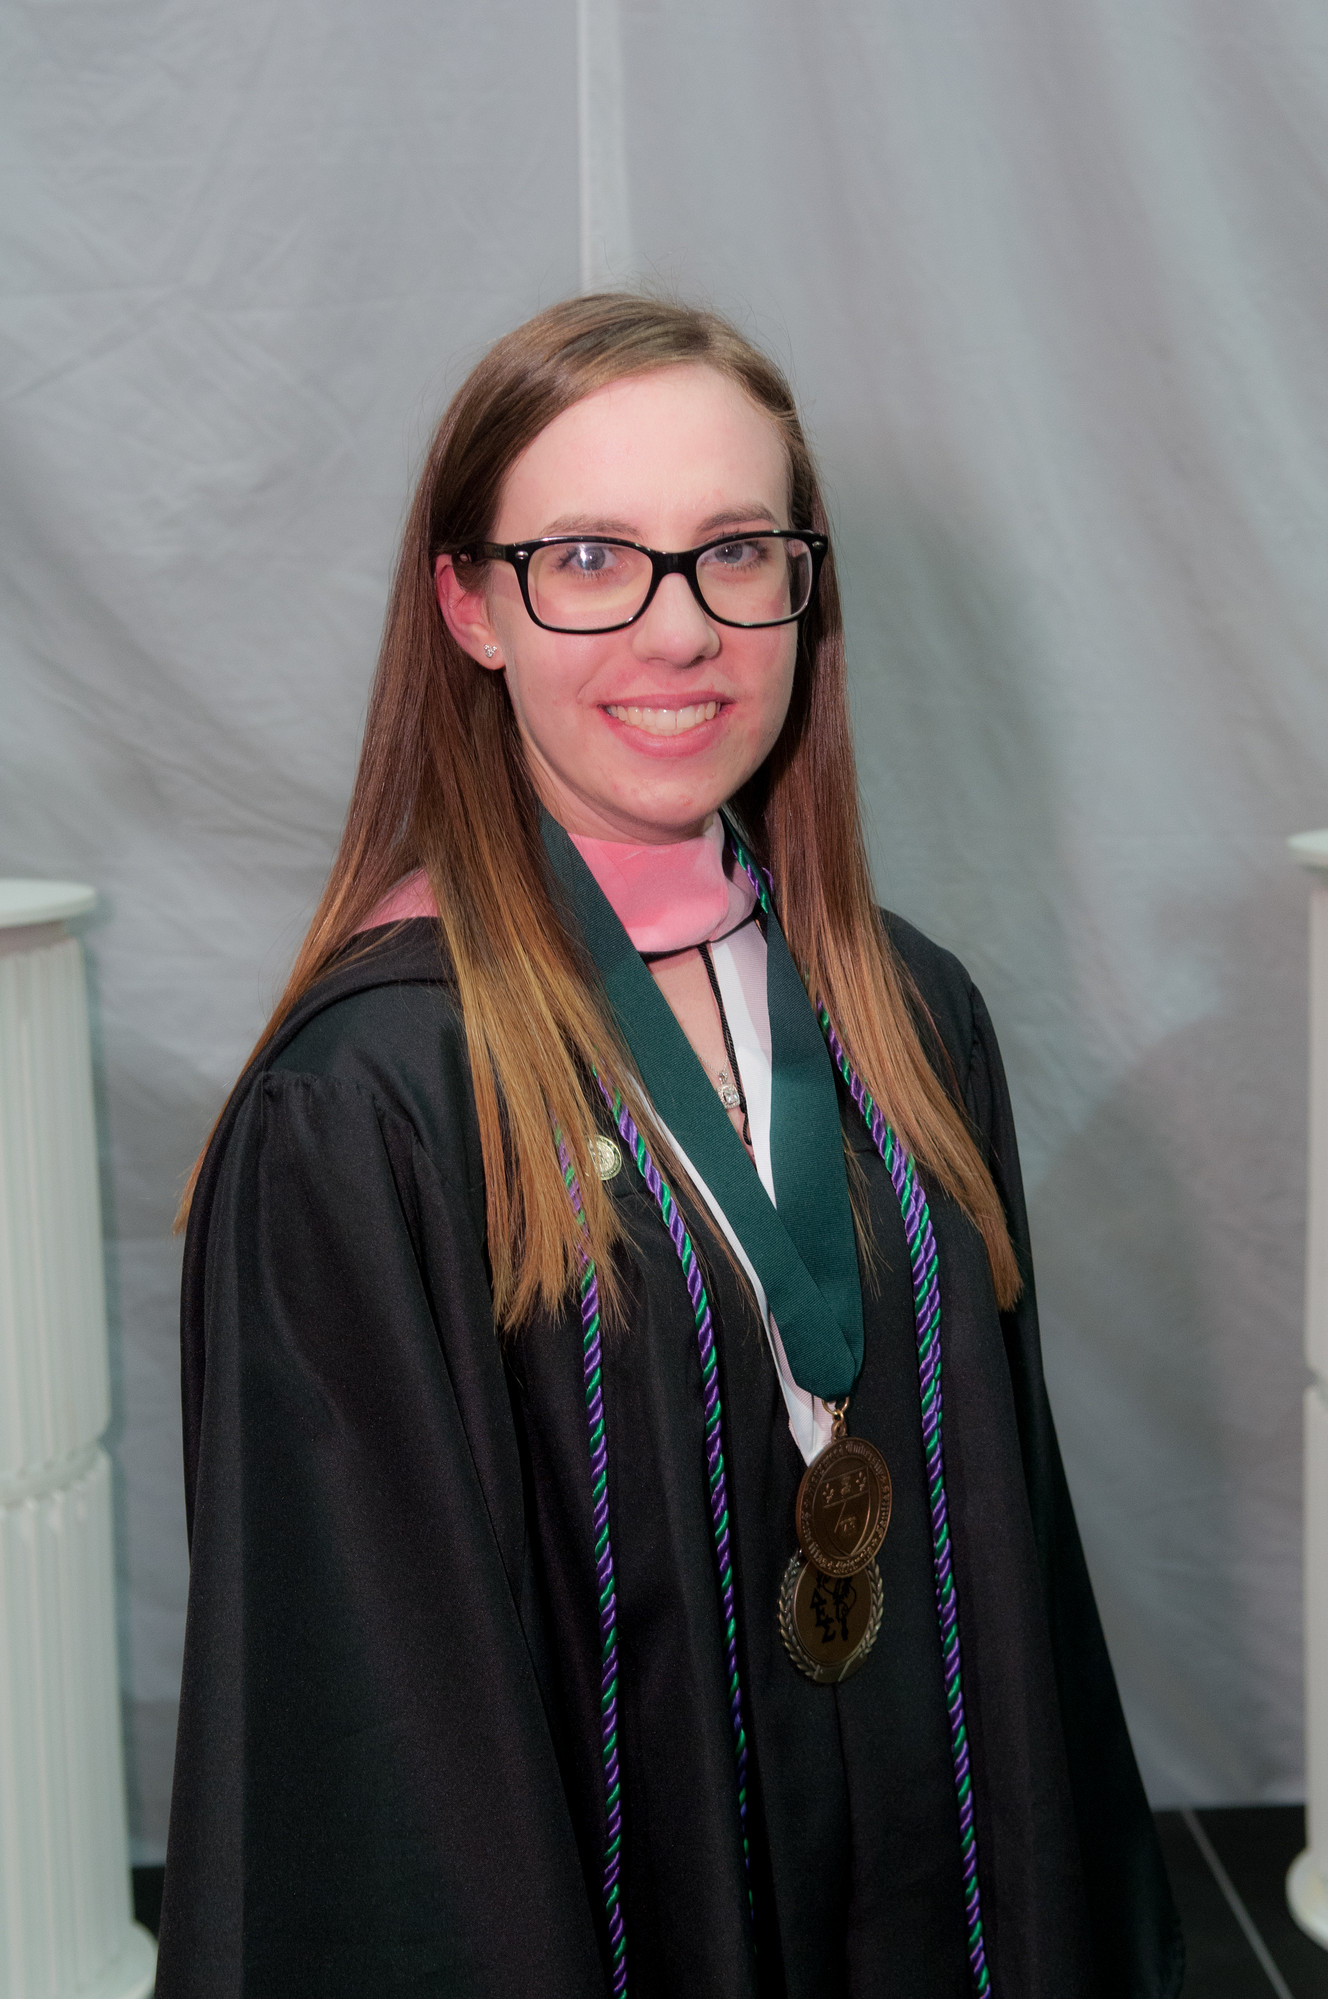 Area Resident Receives Medal at Marywood University Commencement